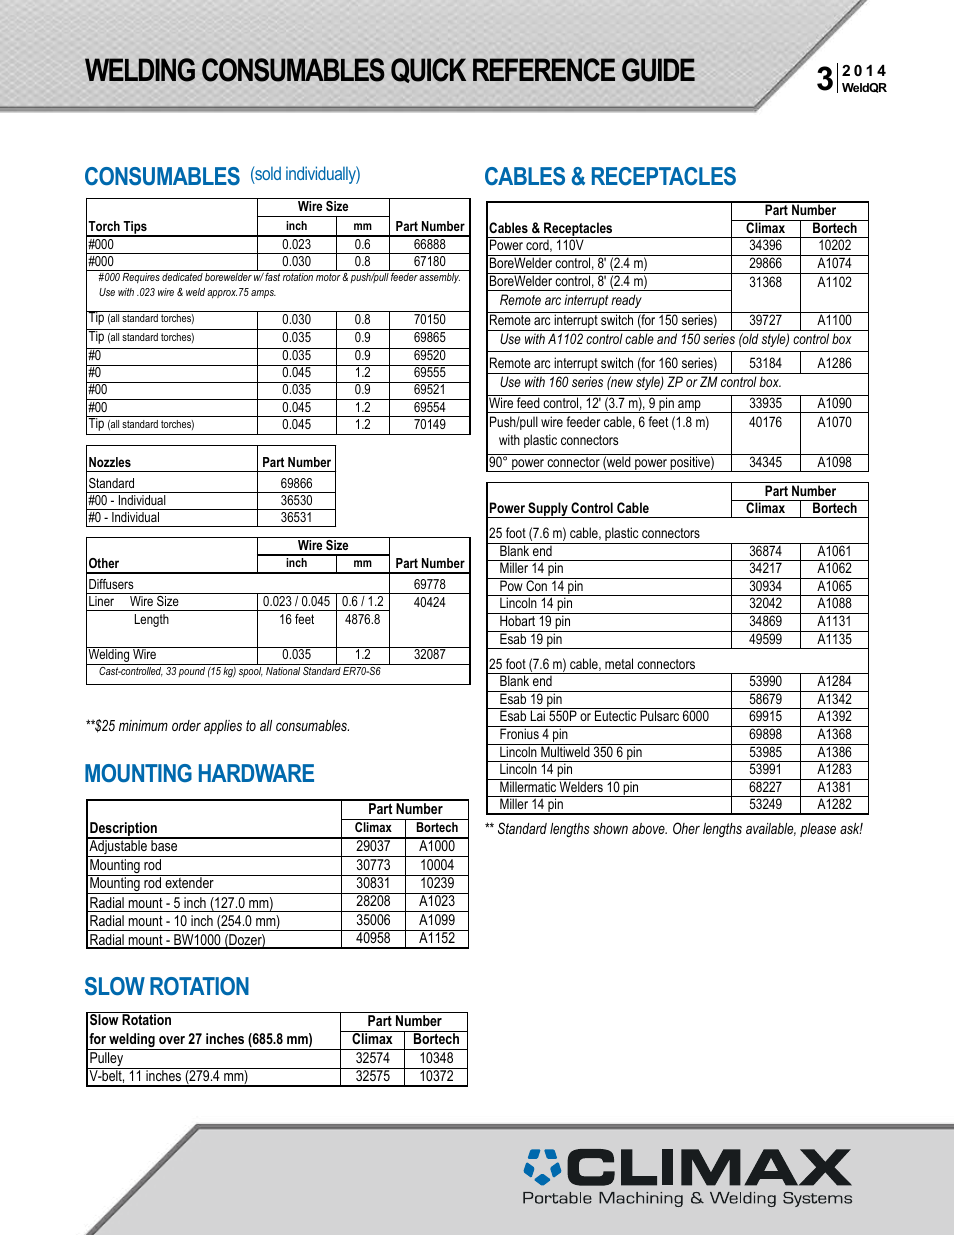 BW1000 WELDING CONSUMABLES QUICK REFERENCE GUIDE